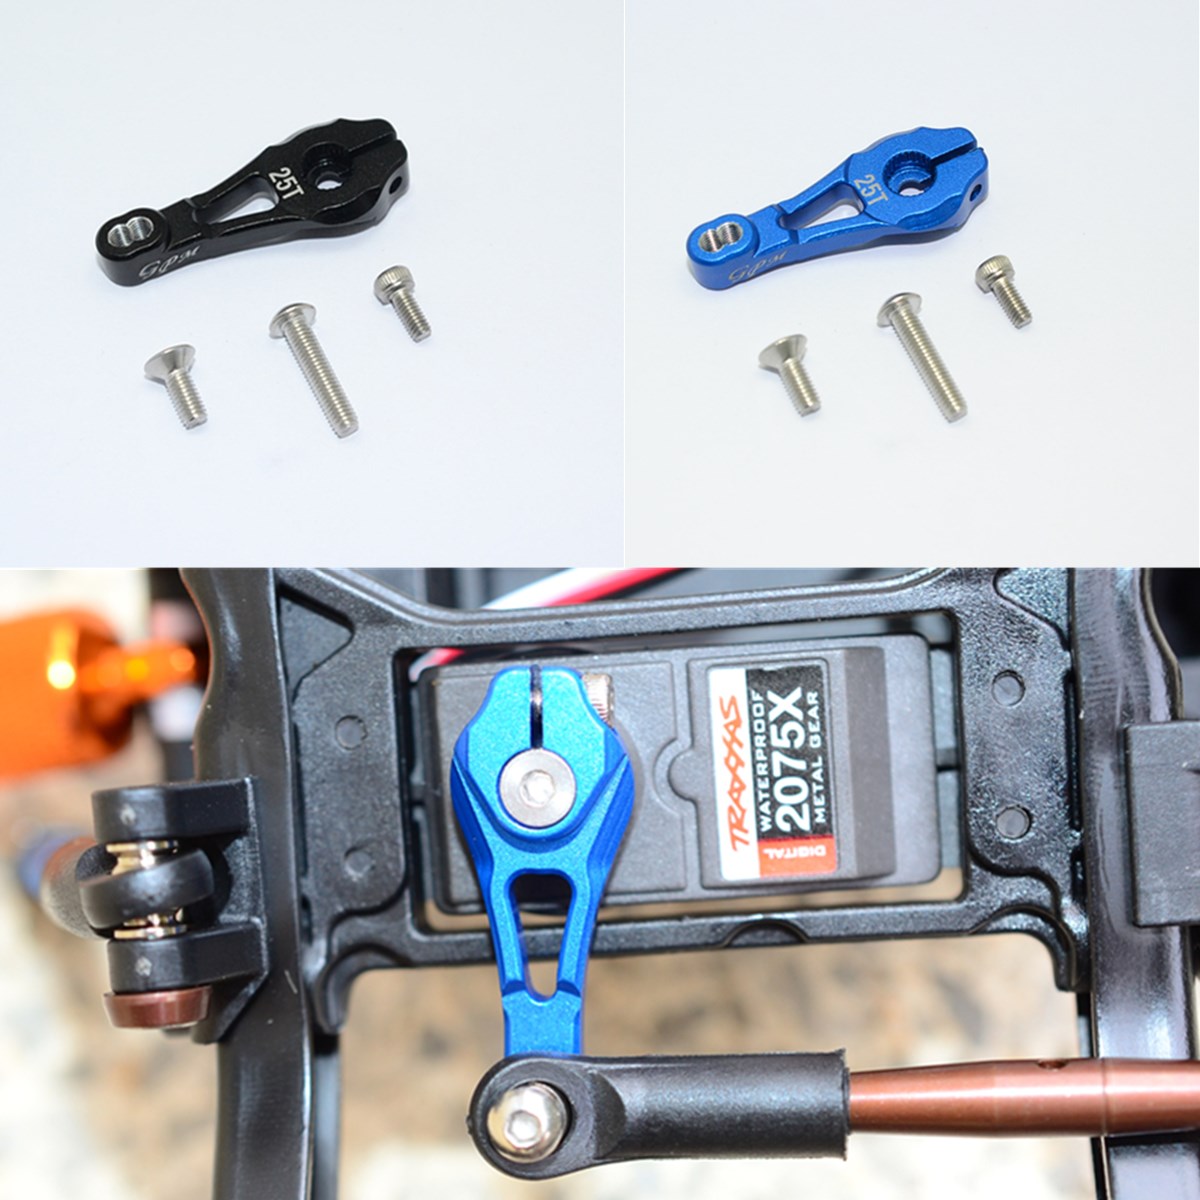 Aluminum Alloy Servo Arm With Screws Accessories Suit for 25T Straight Arm Servo